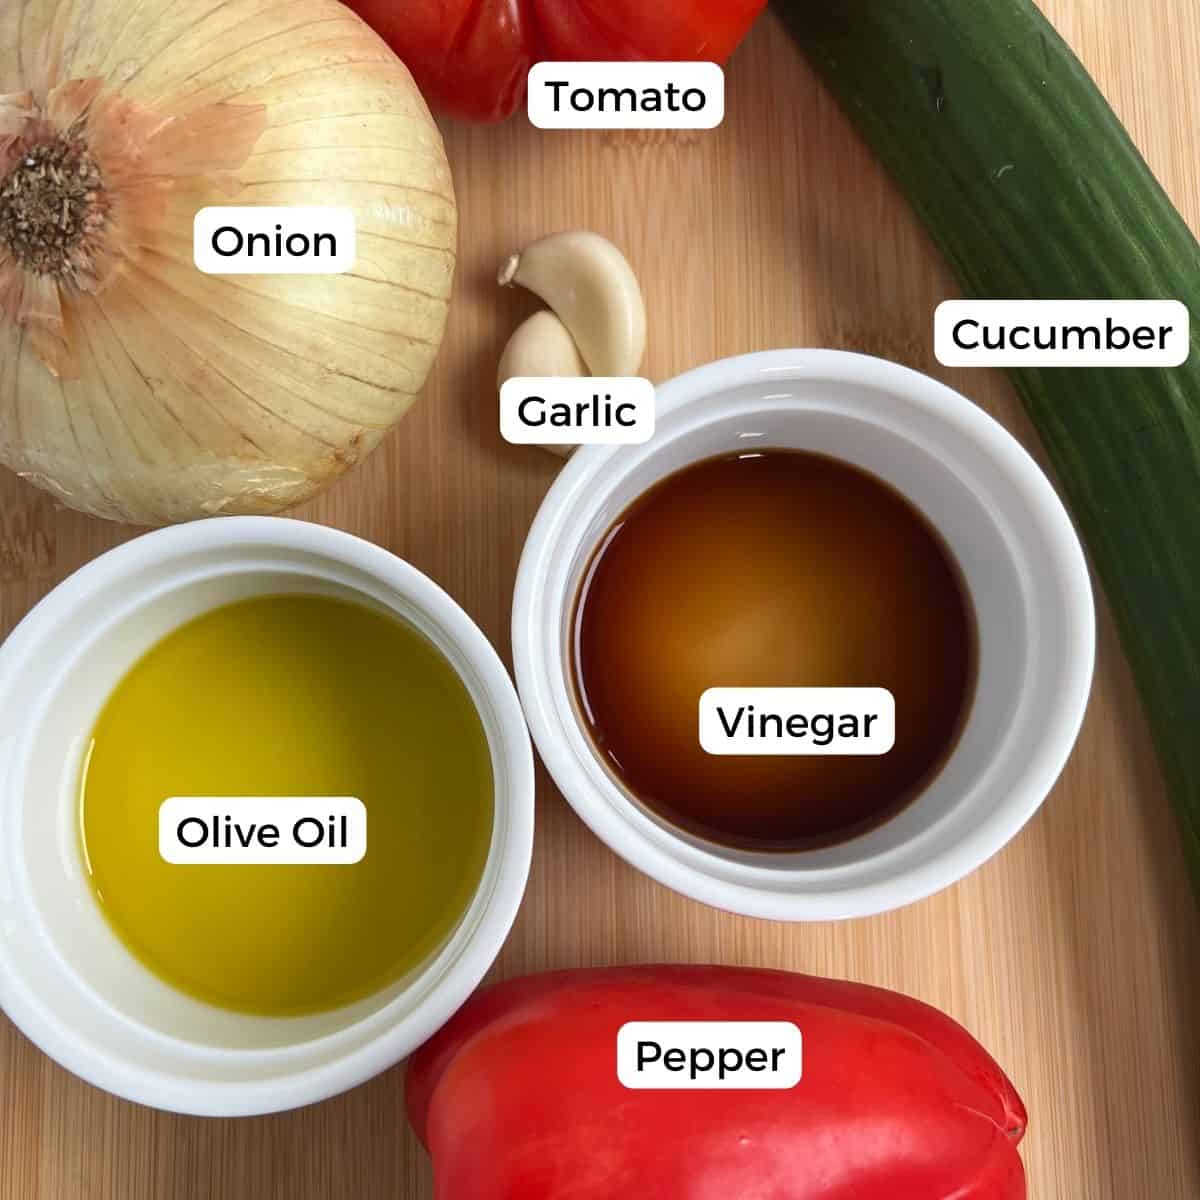 ingredients for gazpacho are tomatoes, cucumber, onion, garlic, and pepper